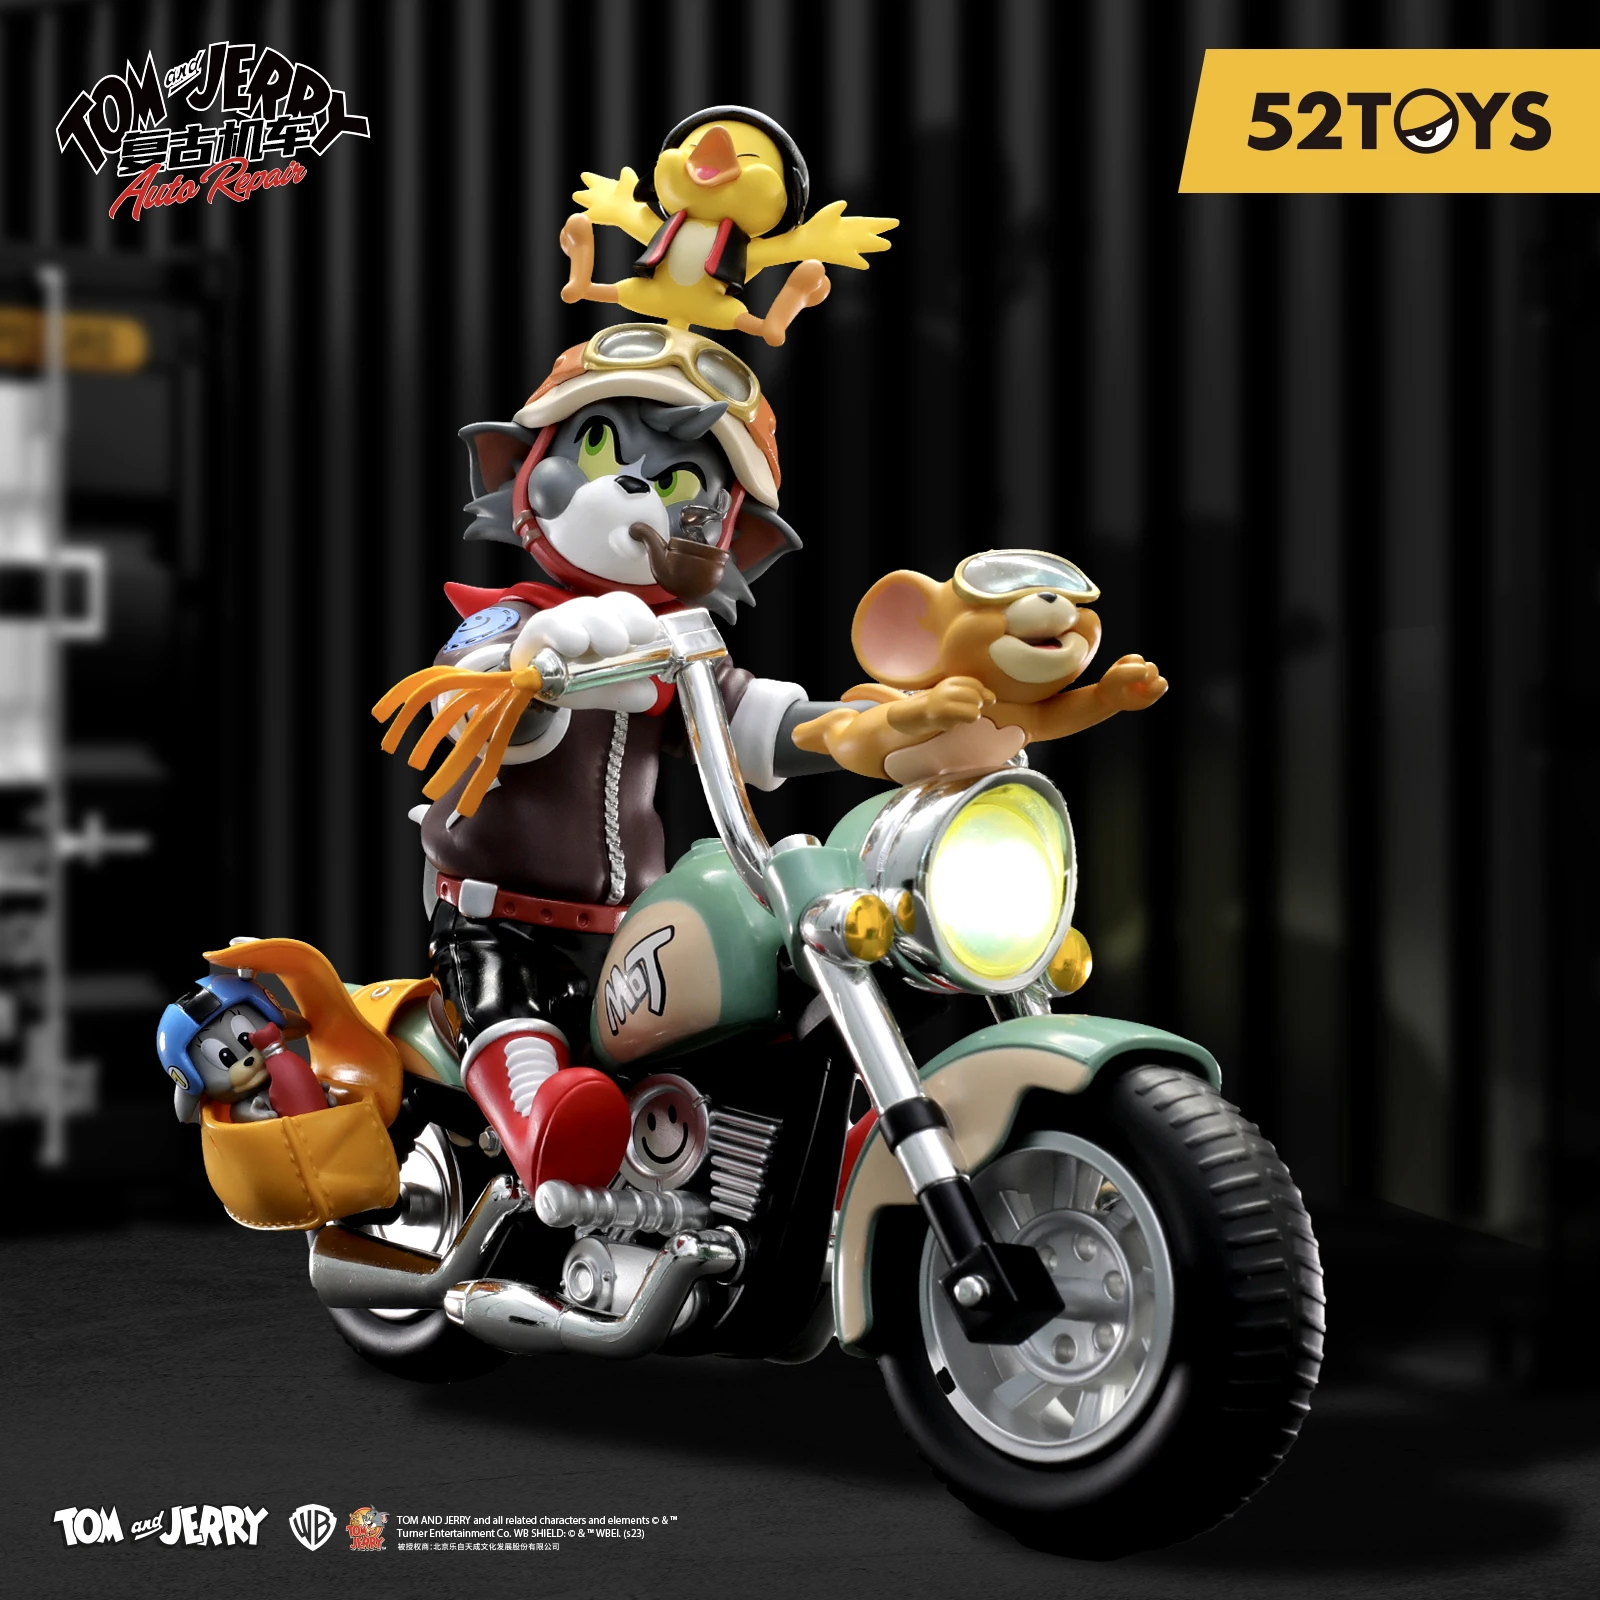 

52TOYS Large Figure Tom and Jerry Retro Motorcycle, Height: 18cm/7.08inch, cute collectible Figures, perfect Gift